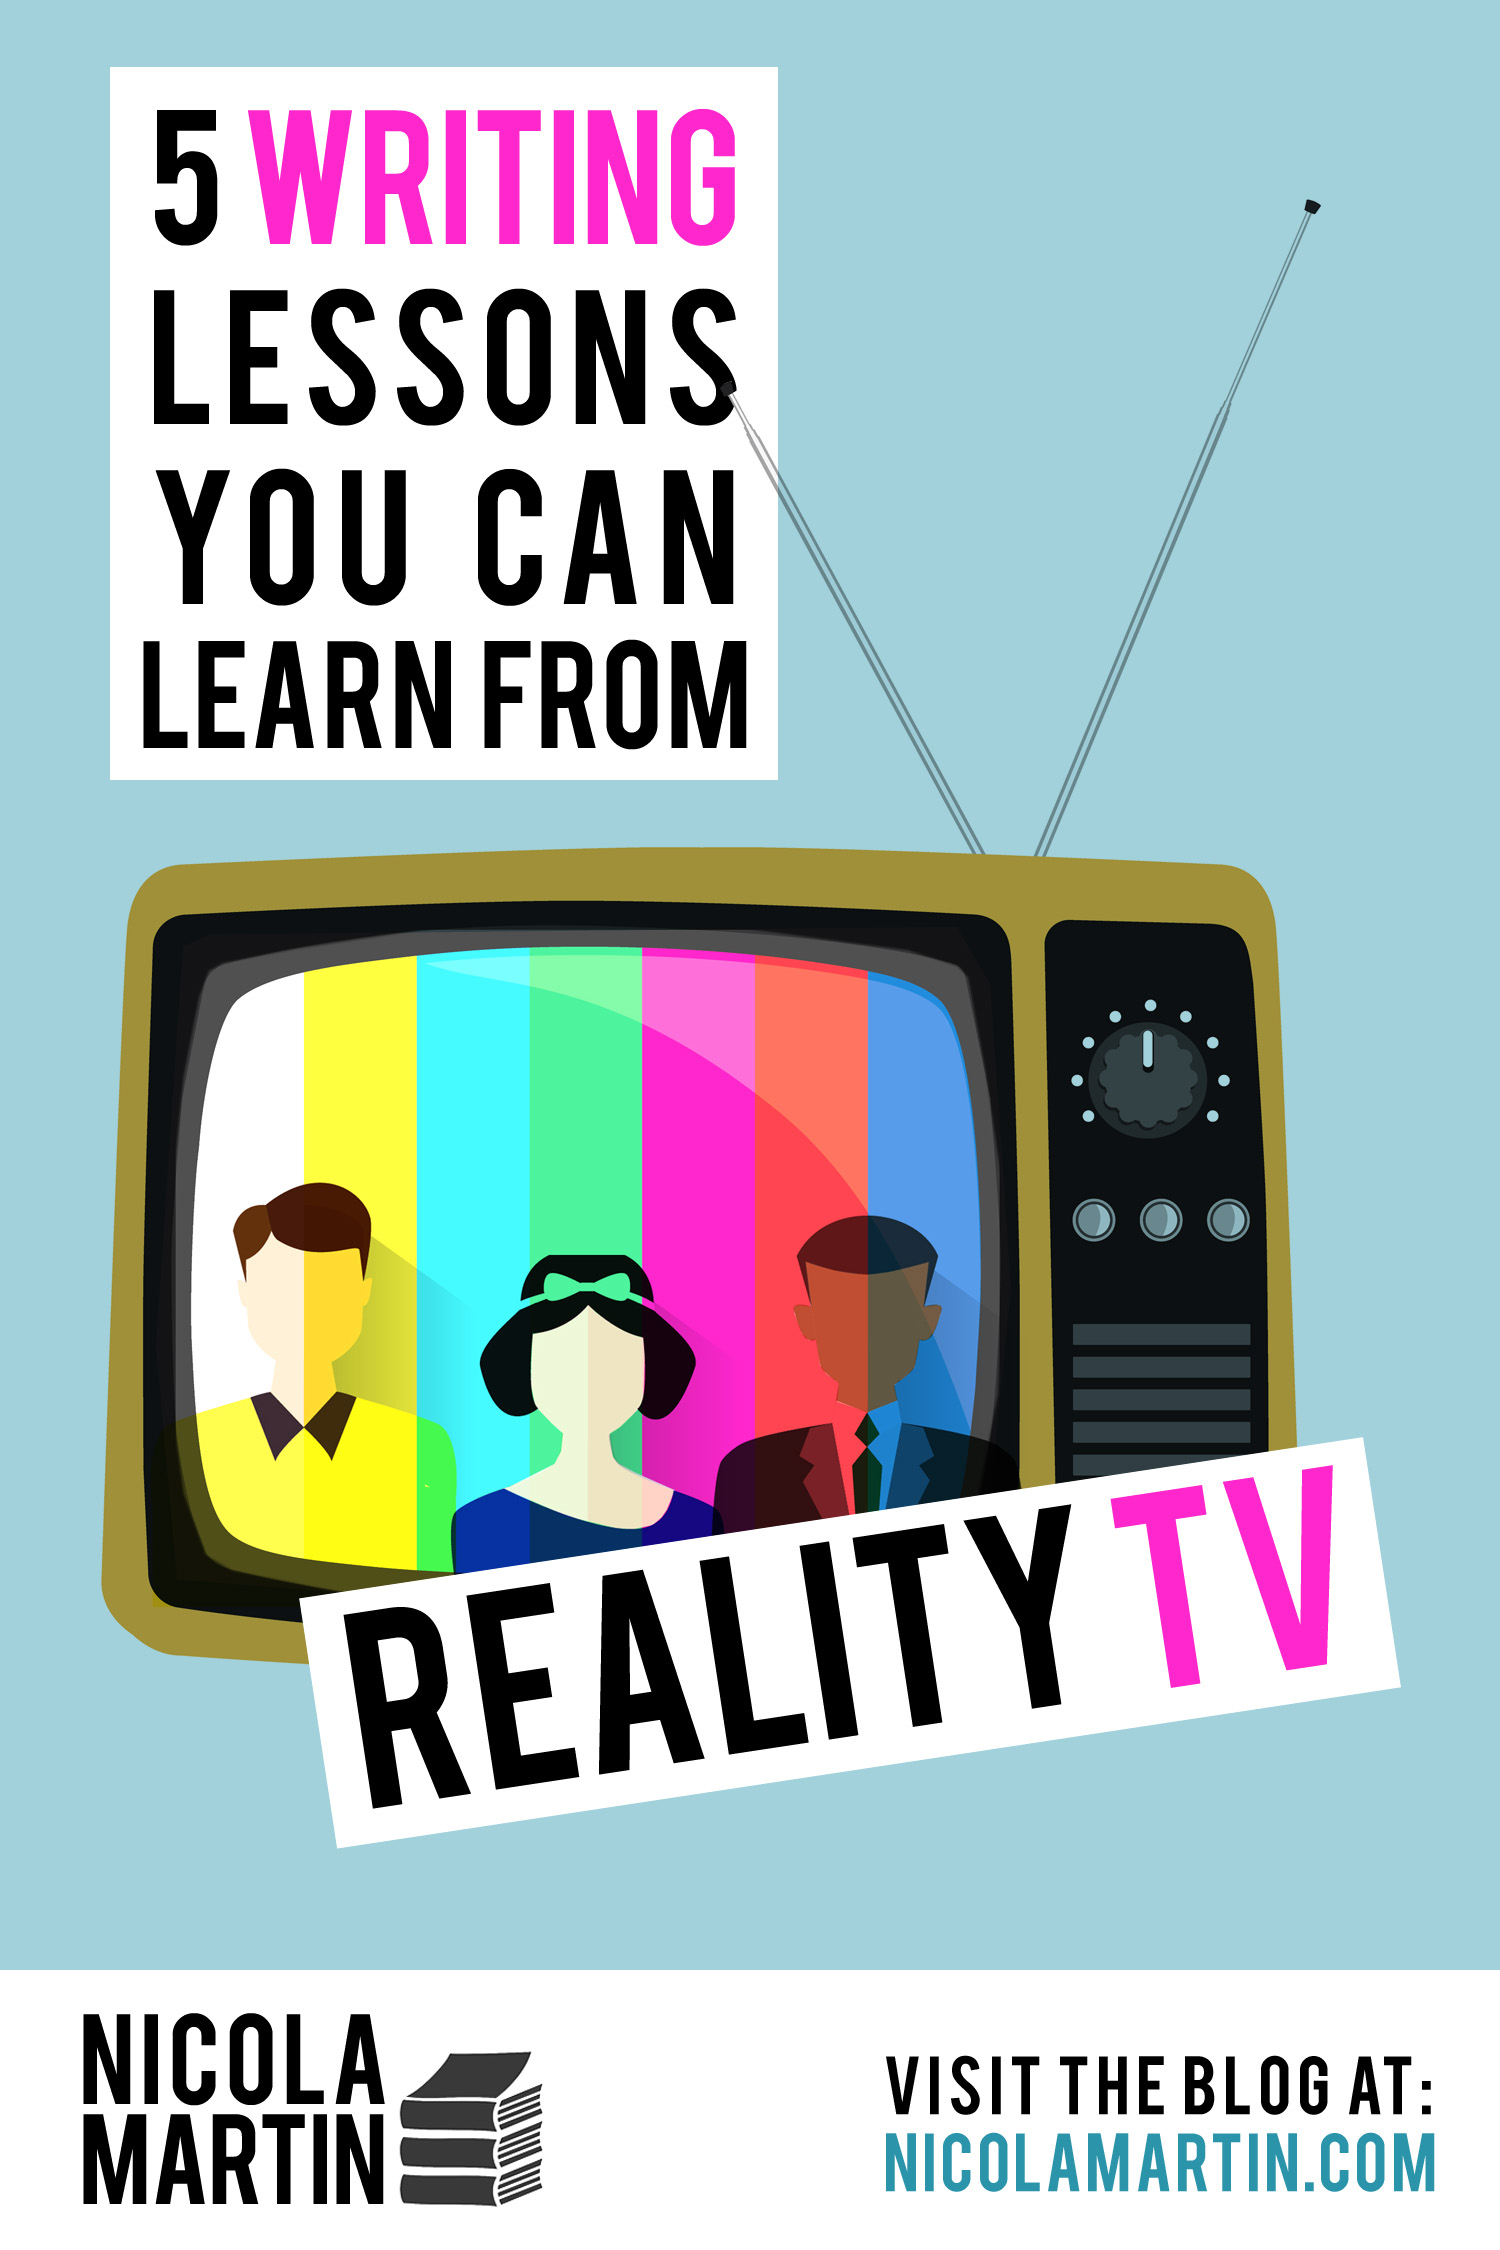 5 writing lessons you can learn from reality TV